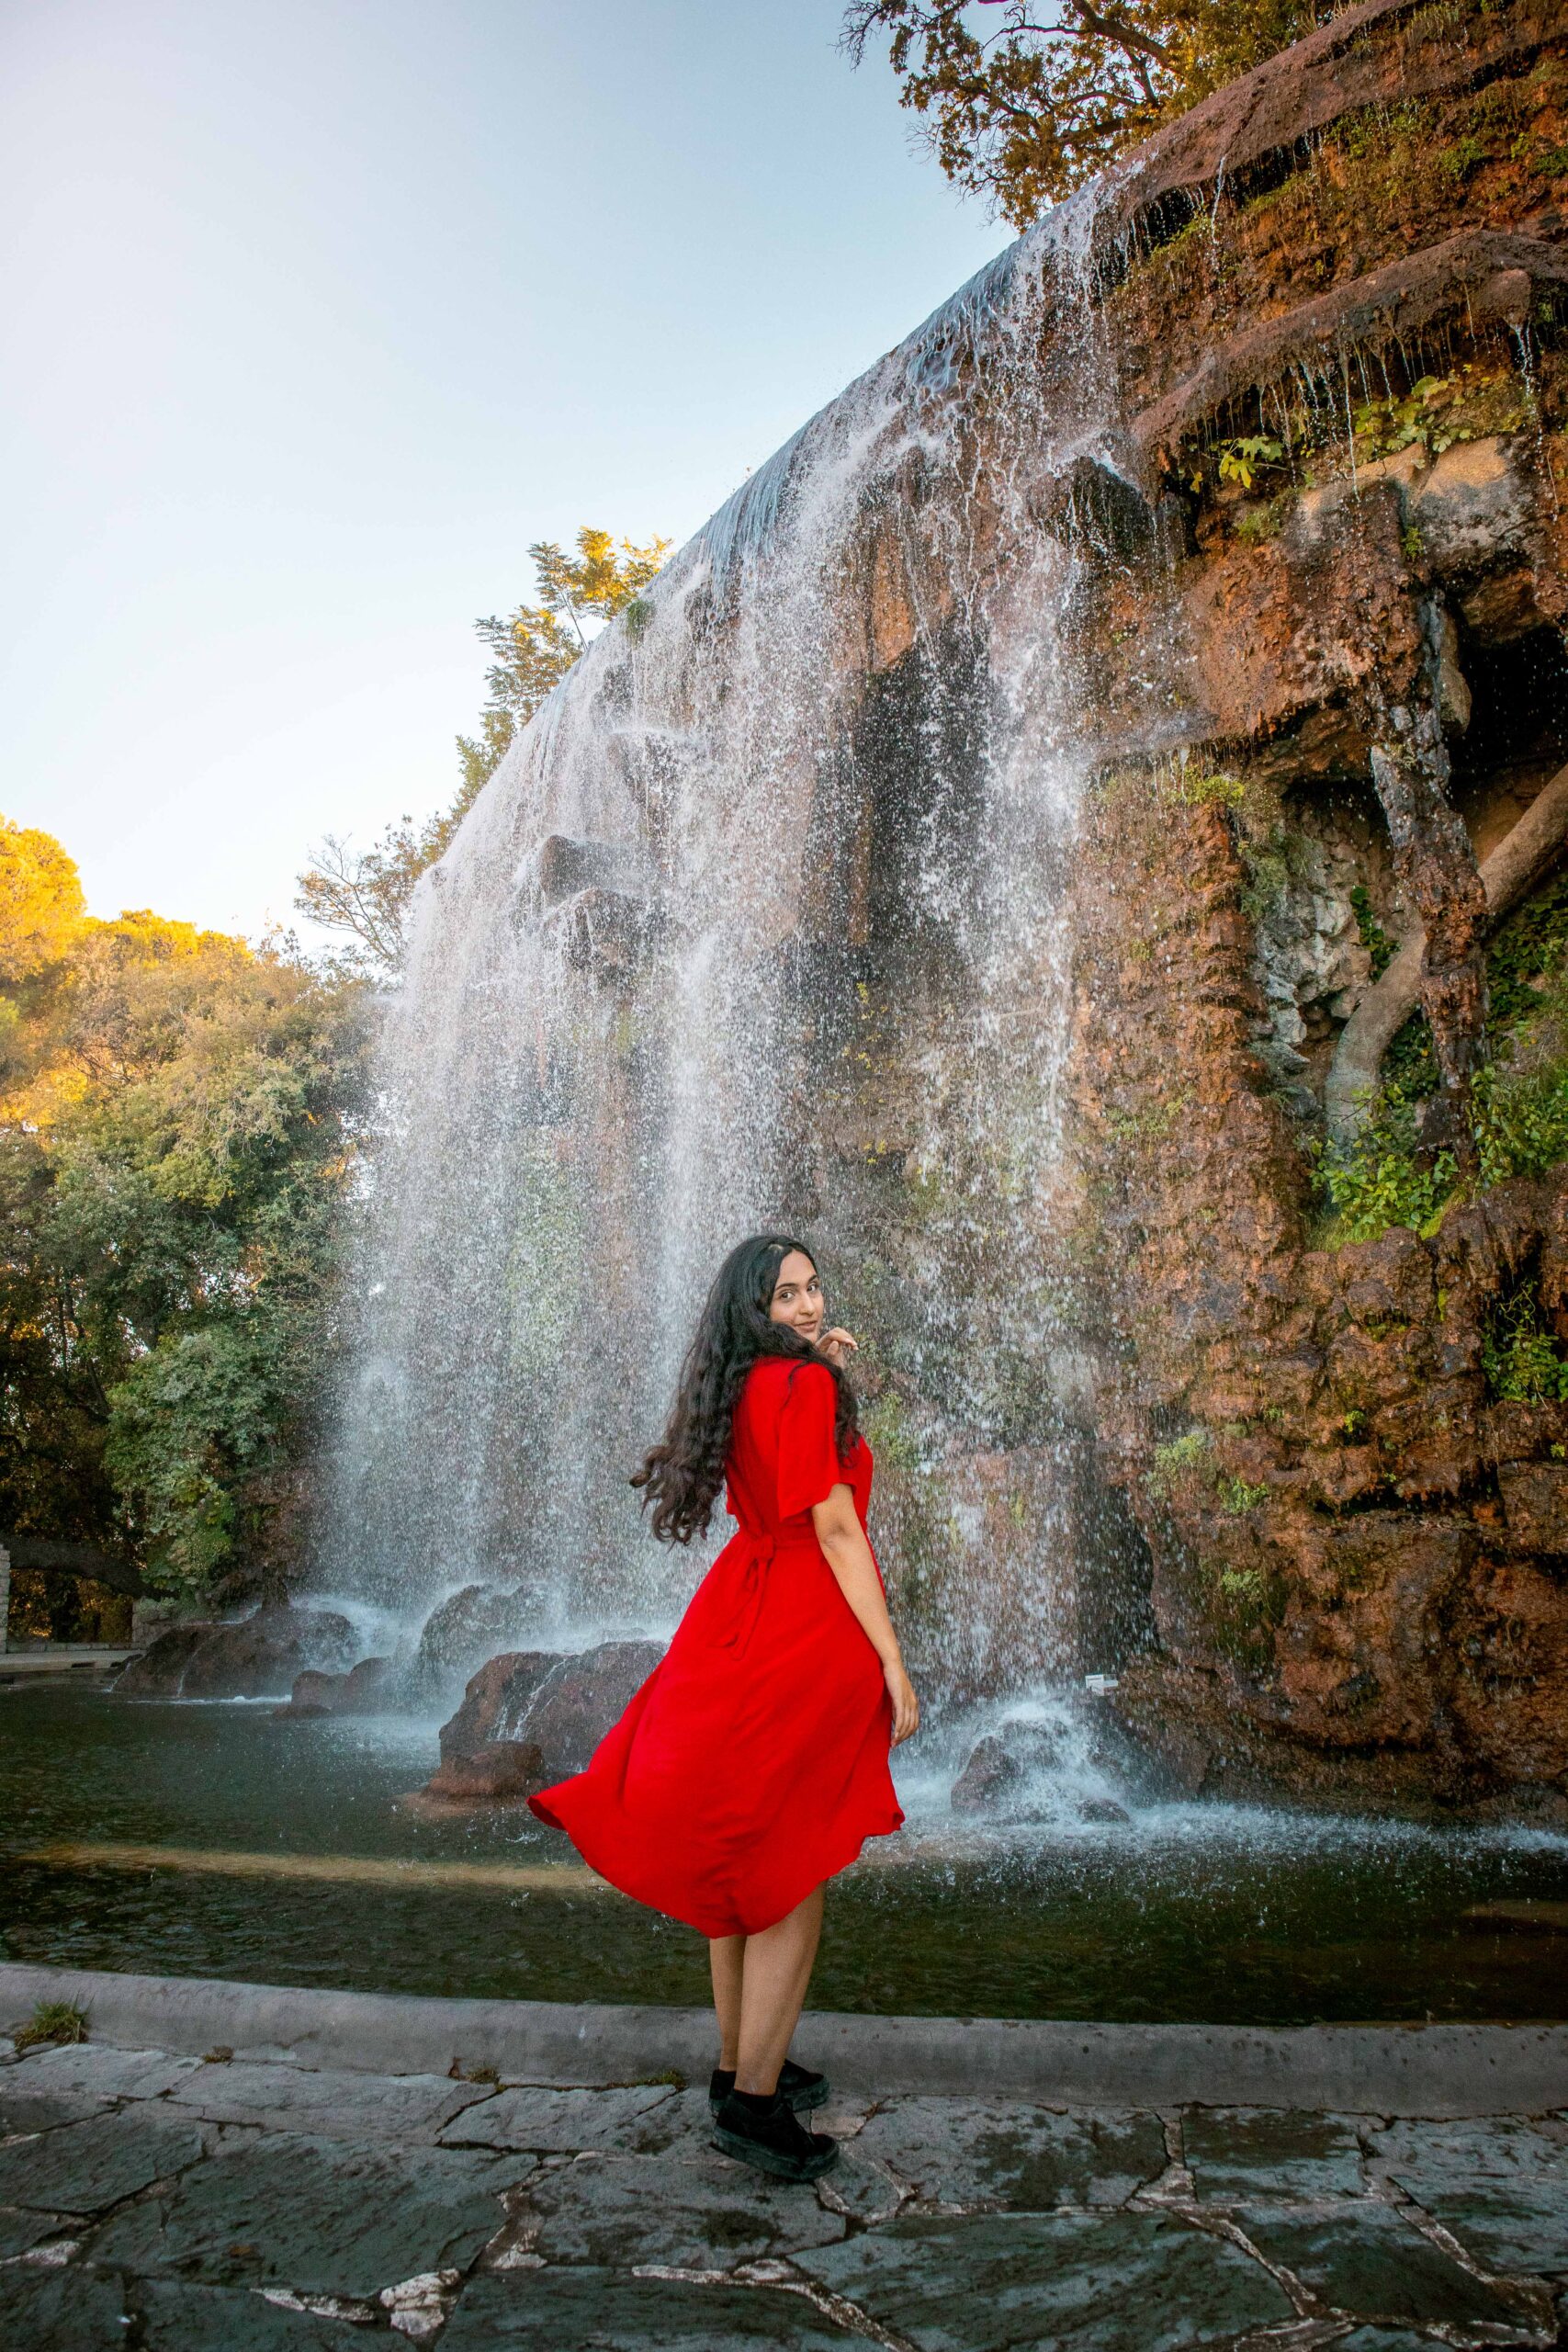 Woman wearing a red dress posing in front of the waterfall at the Colline du Château (Castle Hill) park in Nice, France